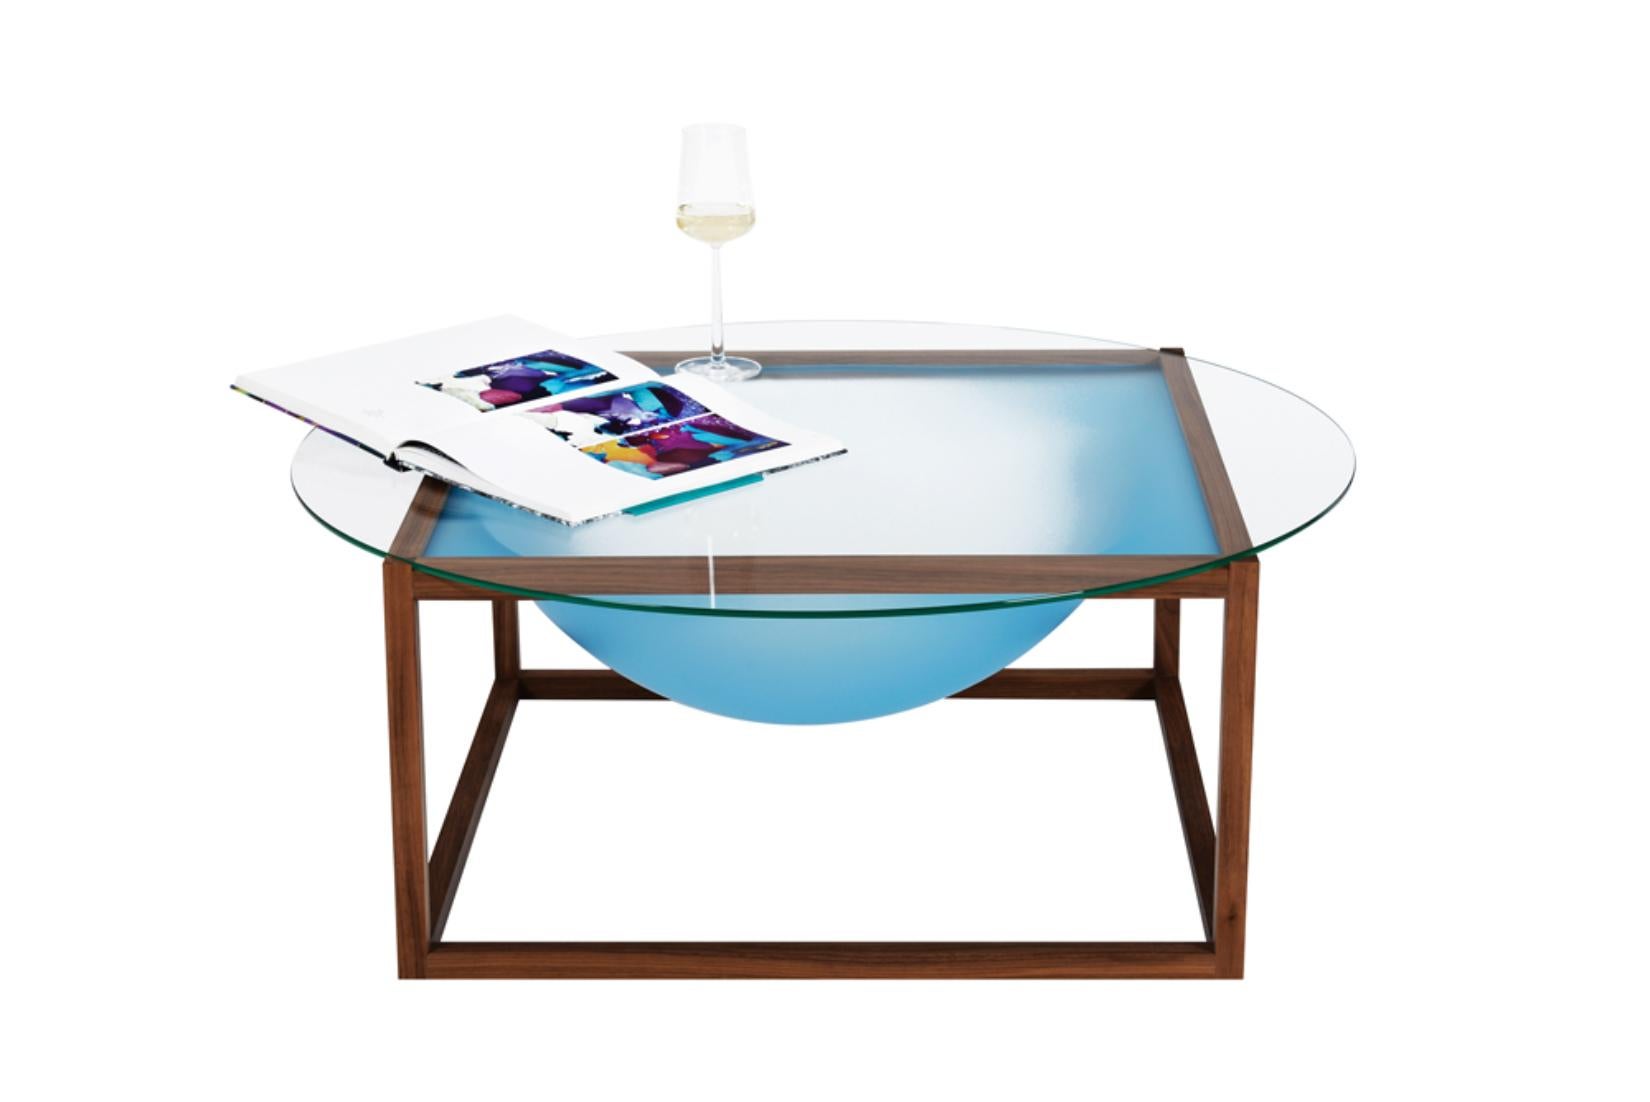 Large Bubble Coffee Table by Studio Thier & van Daalen
Dimensions: W 70 x D 70 x H 30 cm
Materials: Ash, Acrylic Glass, Glass
Also Available: Other colour options available,

With an unique look and effect of depth, this coffee table will bring